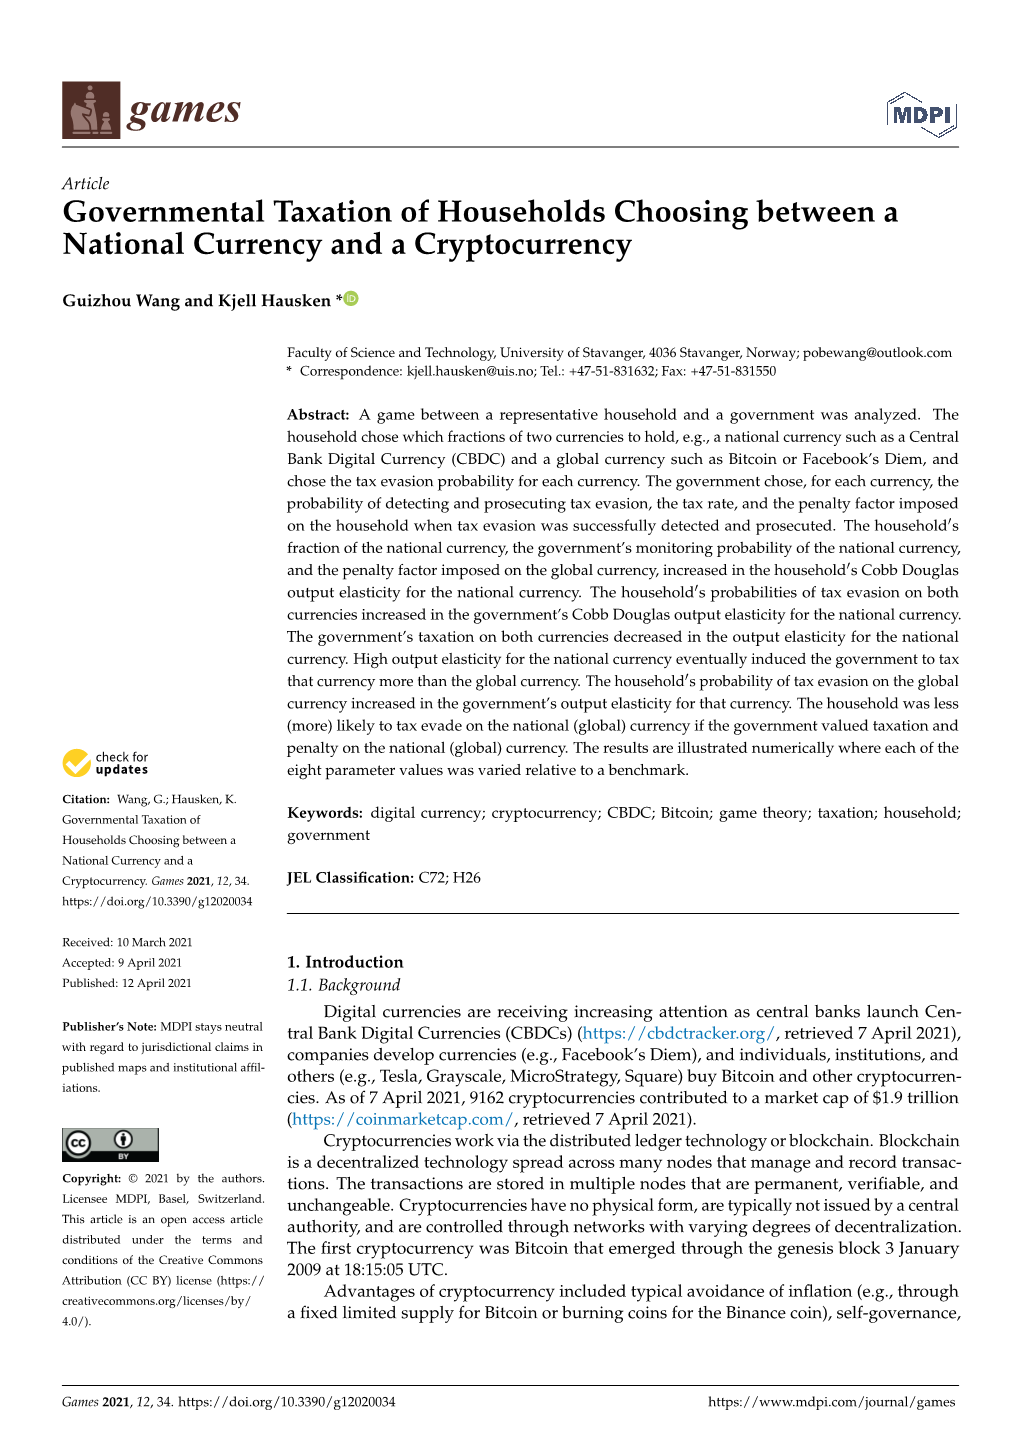 Governmental Taxation of Households Choosing Between a National Currency and a Cryptocurrency